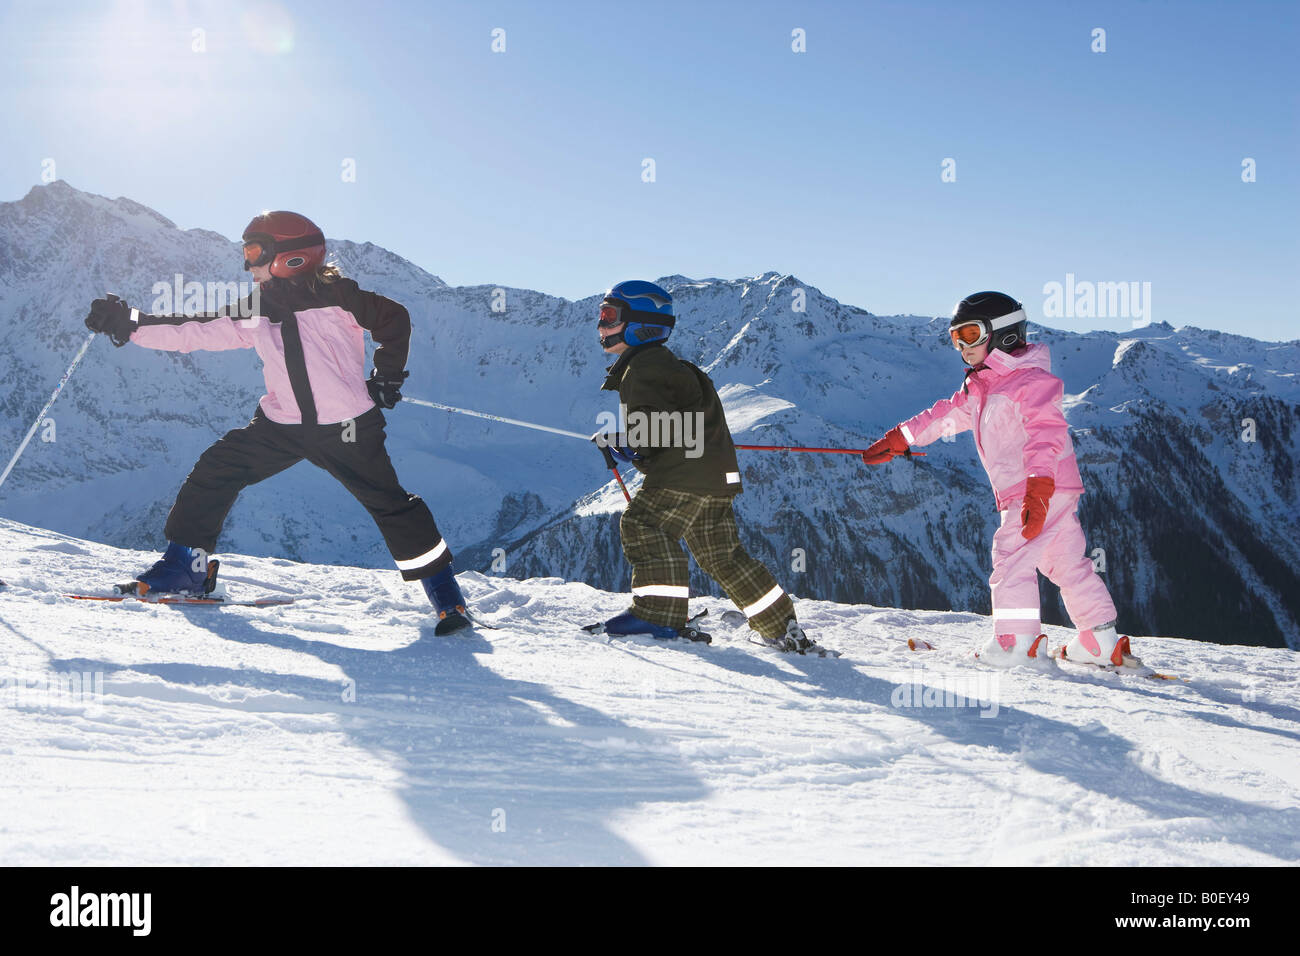 Children walking up slope with skis on Stock Photo